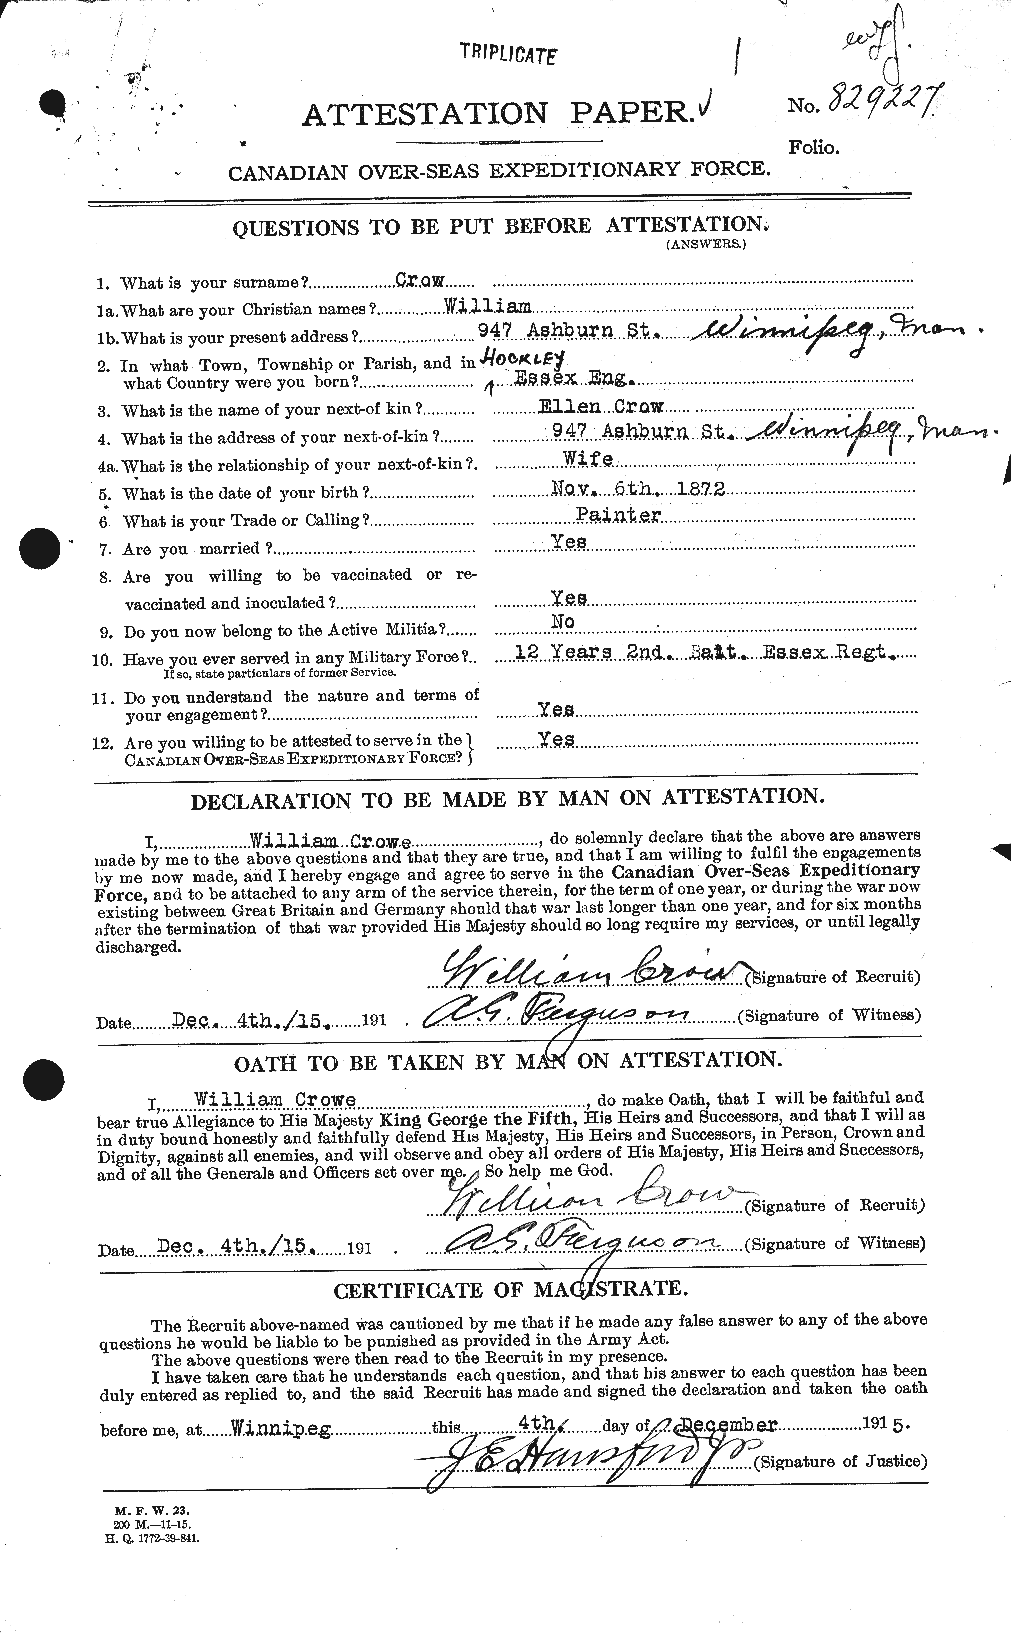 Personnel Records of the First World War - CEF 065528a